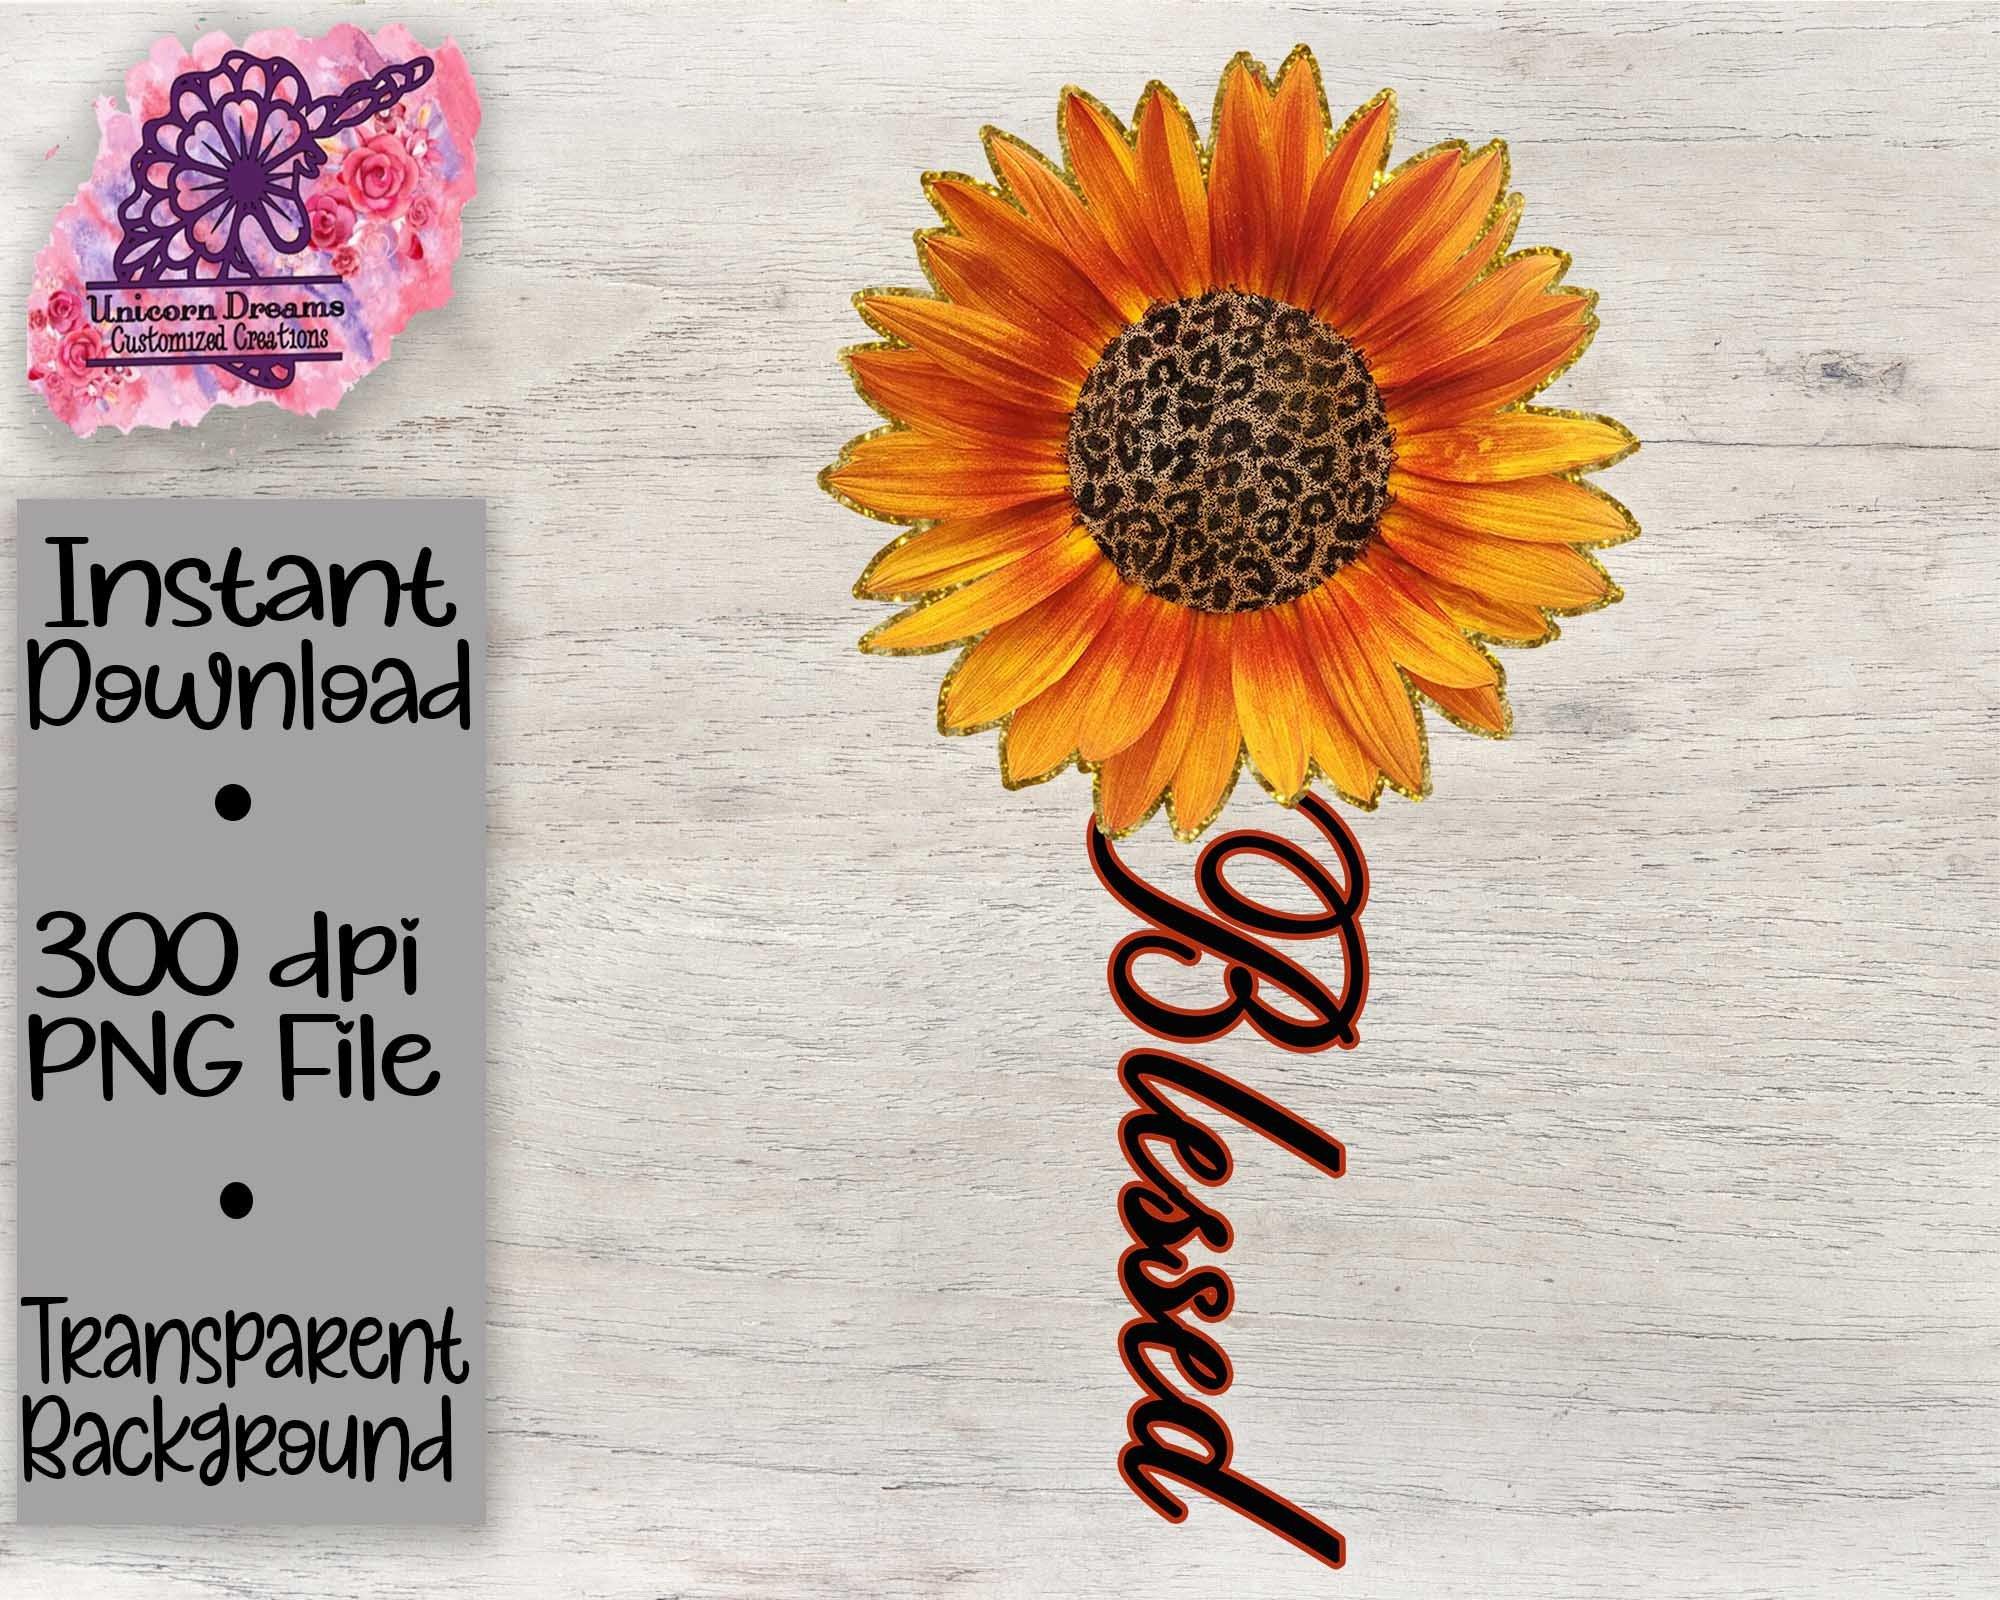 Blessed Sunflower PNG Digital Download - Unicorn Dreams Customized Creations